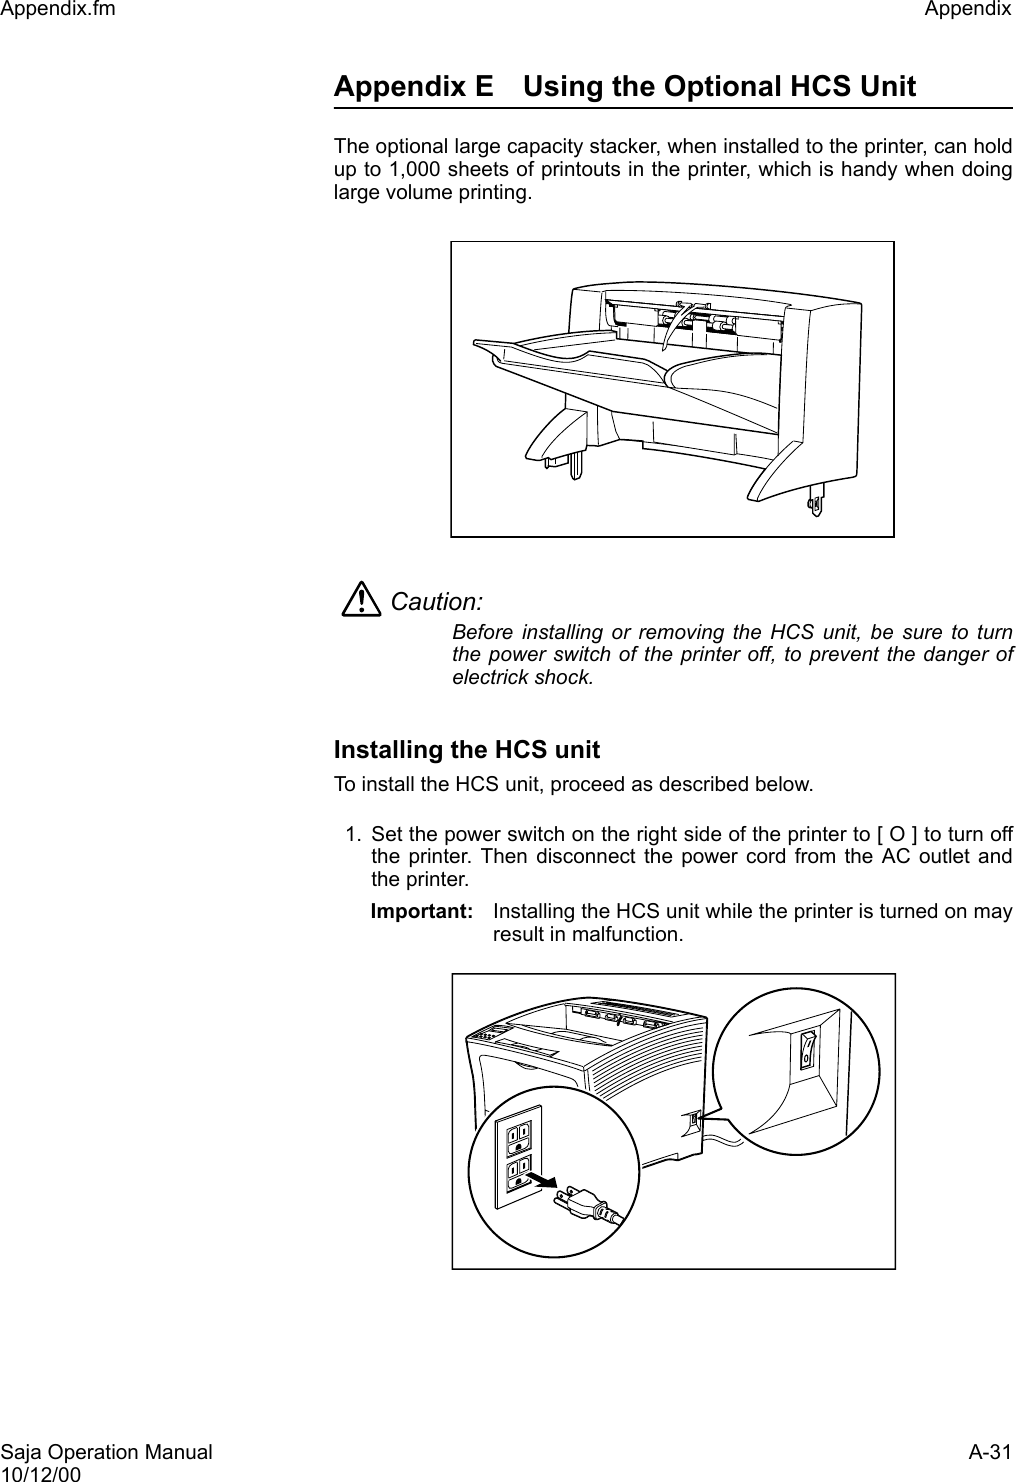 Saja Operation Manual A-3110/12/00Appendix.fm Appendix Appendix E Using the Optional HCS Unit The optional large capacity stacker, when installed to the printer, can holdup to 1,000 sheets of printouts in the printer, which is handy when doinglarge volume printing.Caution: Before installing or removing the HCS unit, be sure to turnthe power switch of the printer off, to prevent the danger ofelectrick shock.Installing the HCS unitTo install the HCS unit, proceed as described below. 1. Set the power switch on the right side of the printer to [ O ] to turn offthe printer. Then disconnect the power cord from the AC outlet andthe printer. Important: Installing the HCS unit while the printer is turned on mayresult in malfunction. 